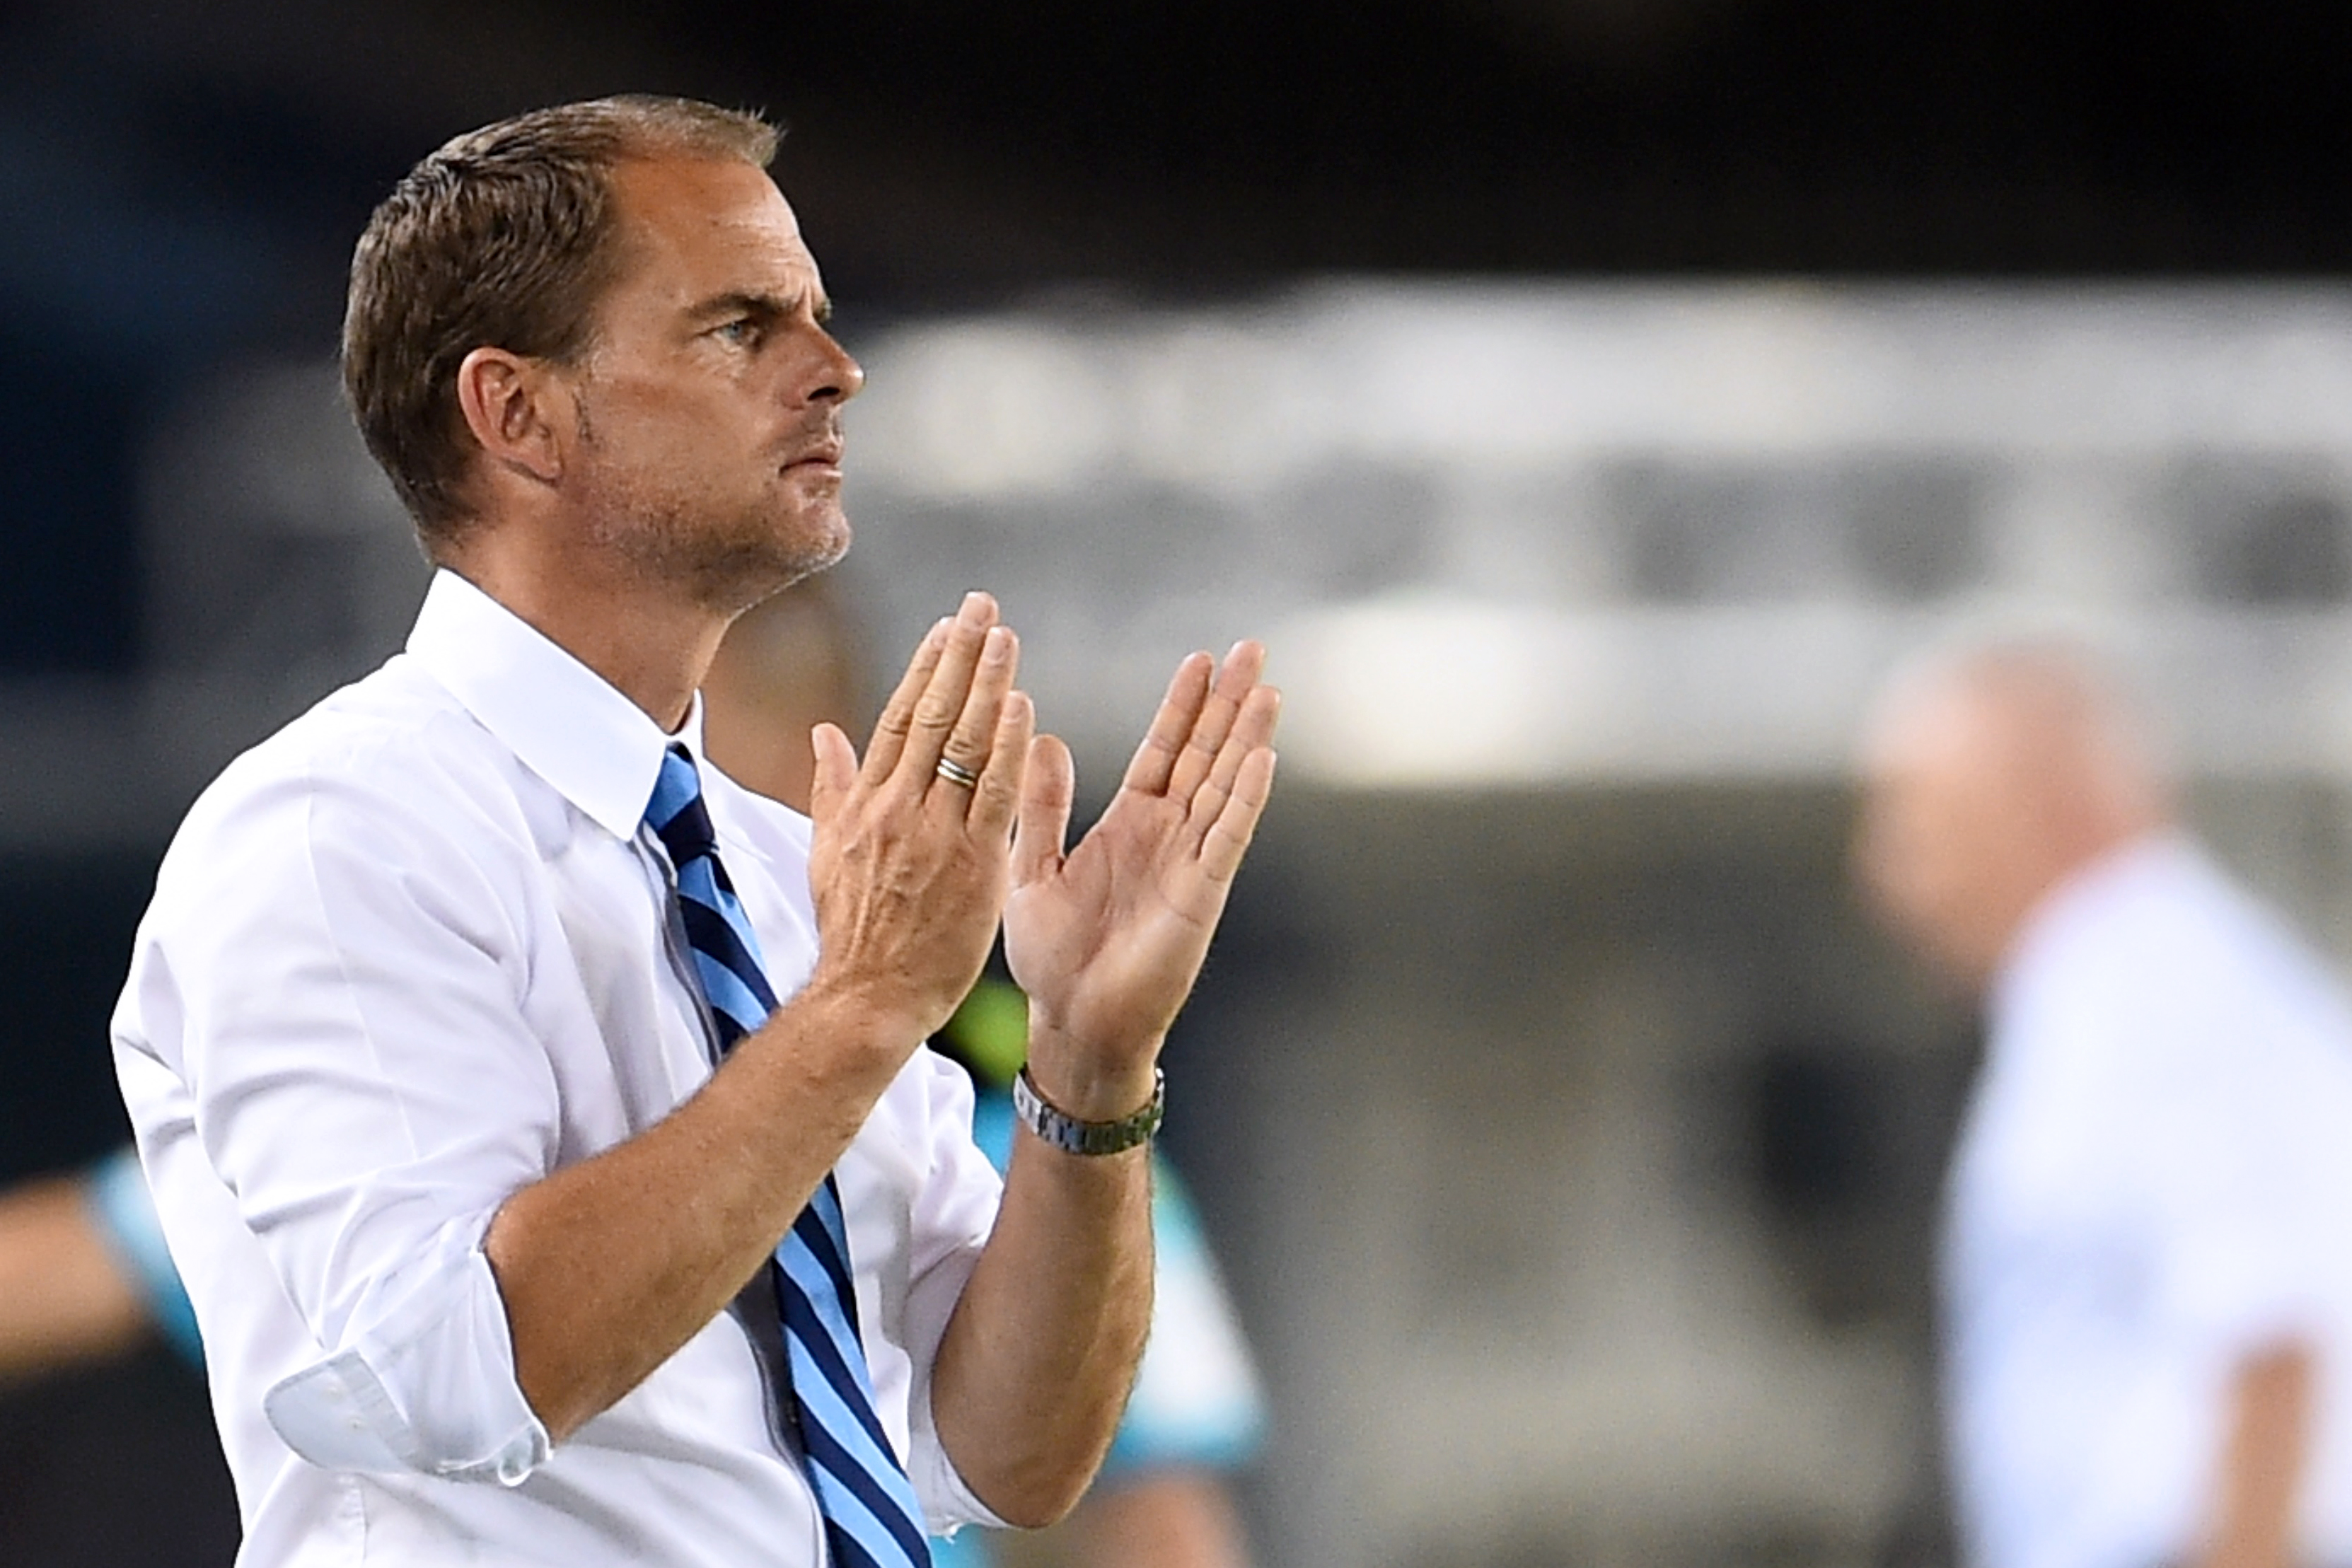 De Boer to IC: ” We are getting better”